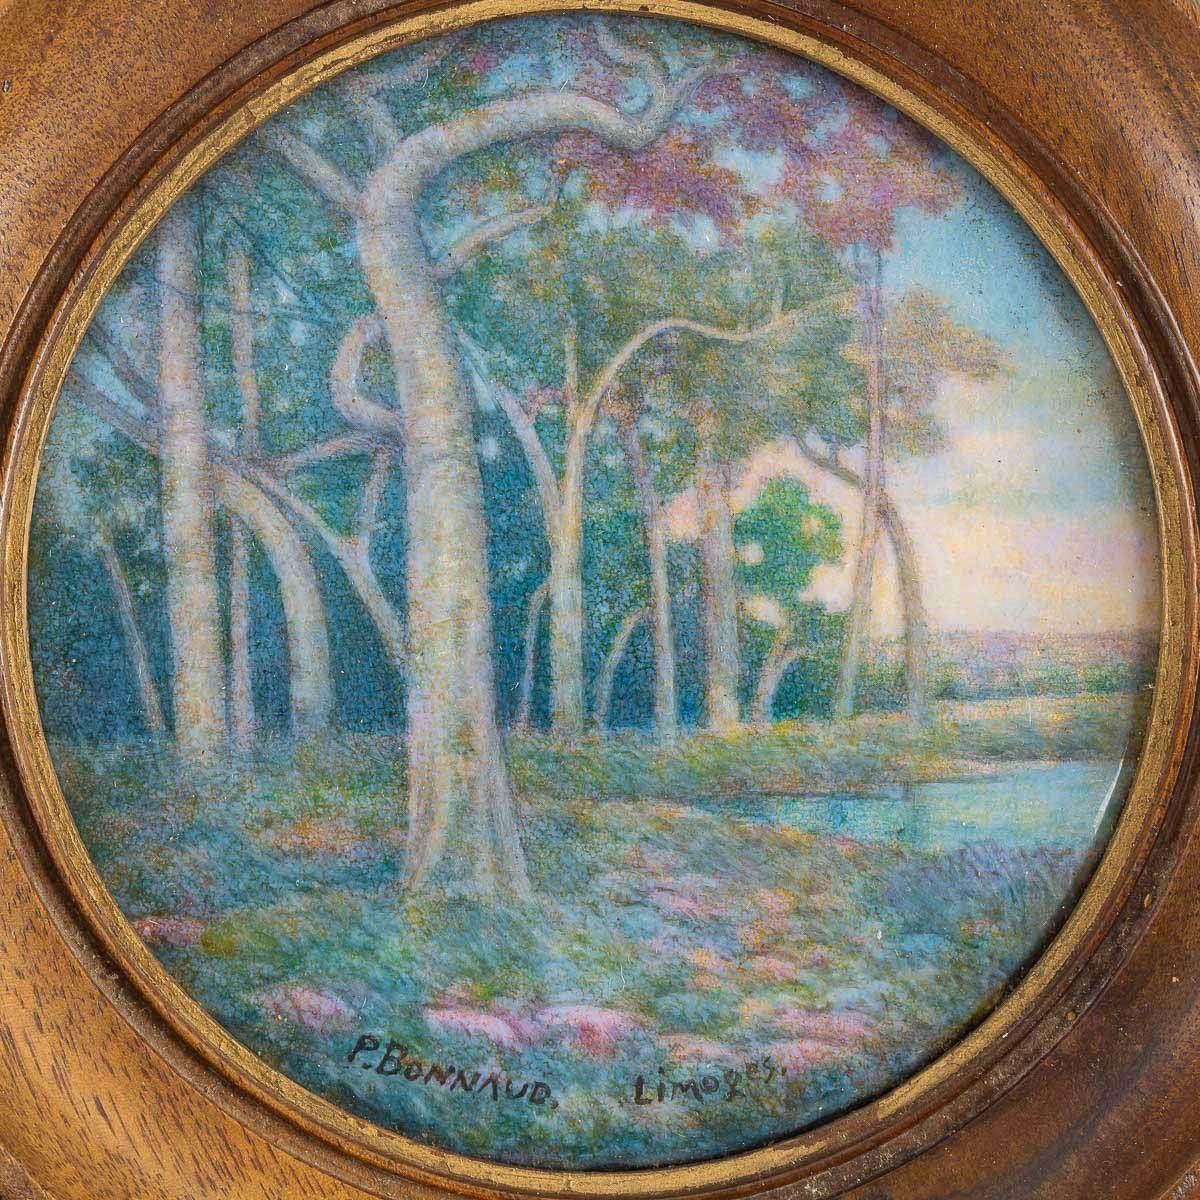 Paul Bonnaud (1876–1953), Limoges 
“Trees by a Lake”
Symbolist Art Nouveau Landscape 
A circular polychromic enamel plaque.
In a carved varnished wood frame
Signed and located Limoges
Circa 1900

Paul Bonnaud was a master enameler in Limoges at the